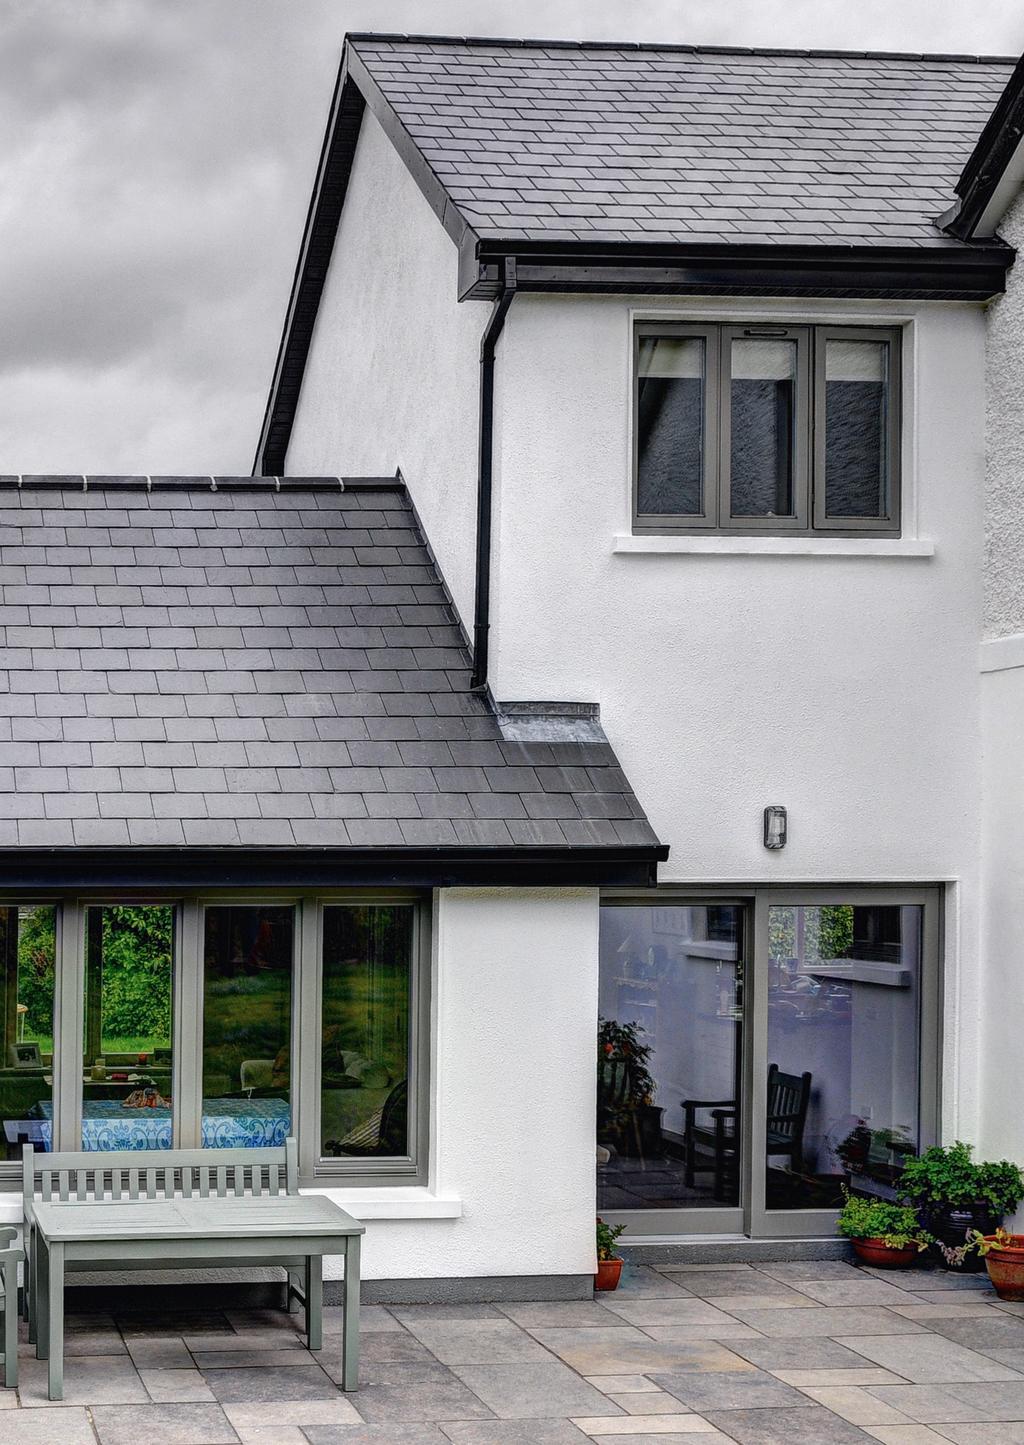 Flush casement windows offer clean lines and classic finishes to suit a wide variety of homes, from ultra-contemporary residences to characterful older buildings.